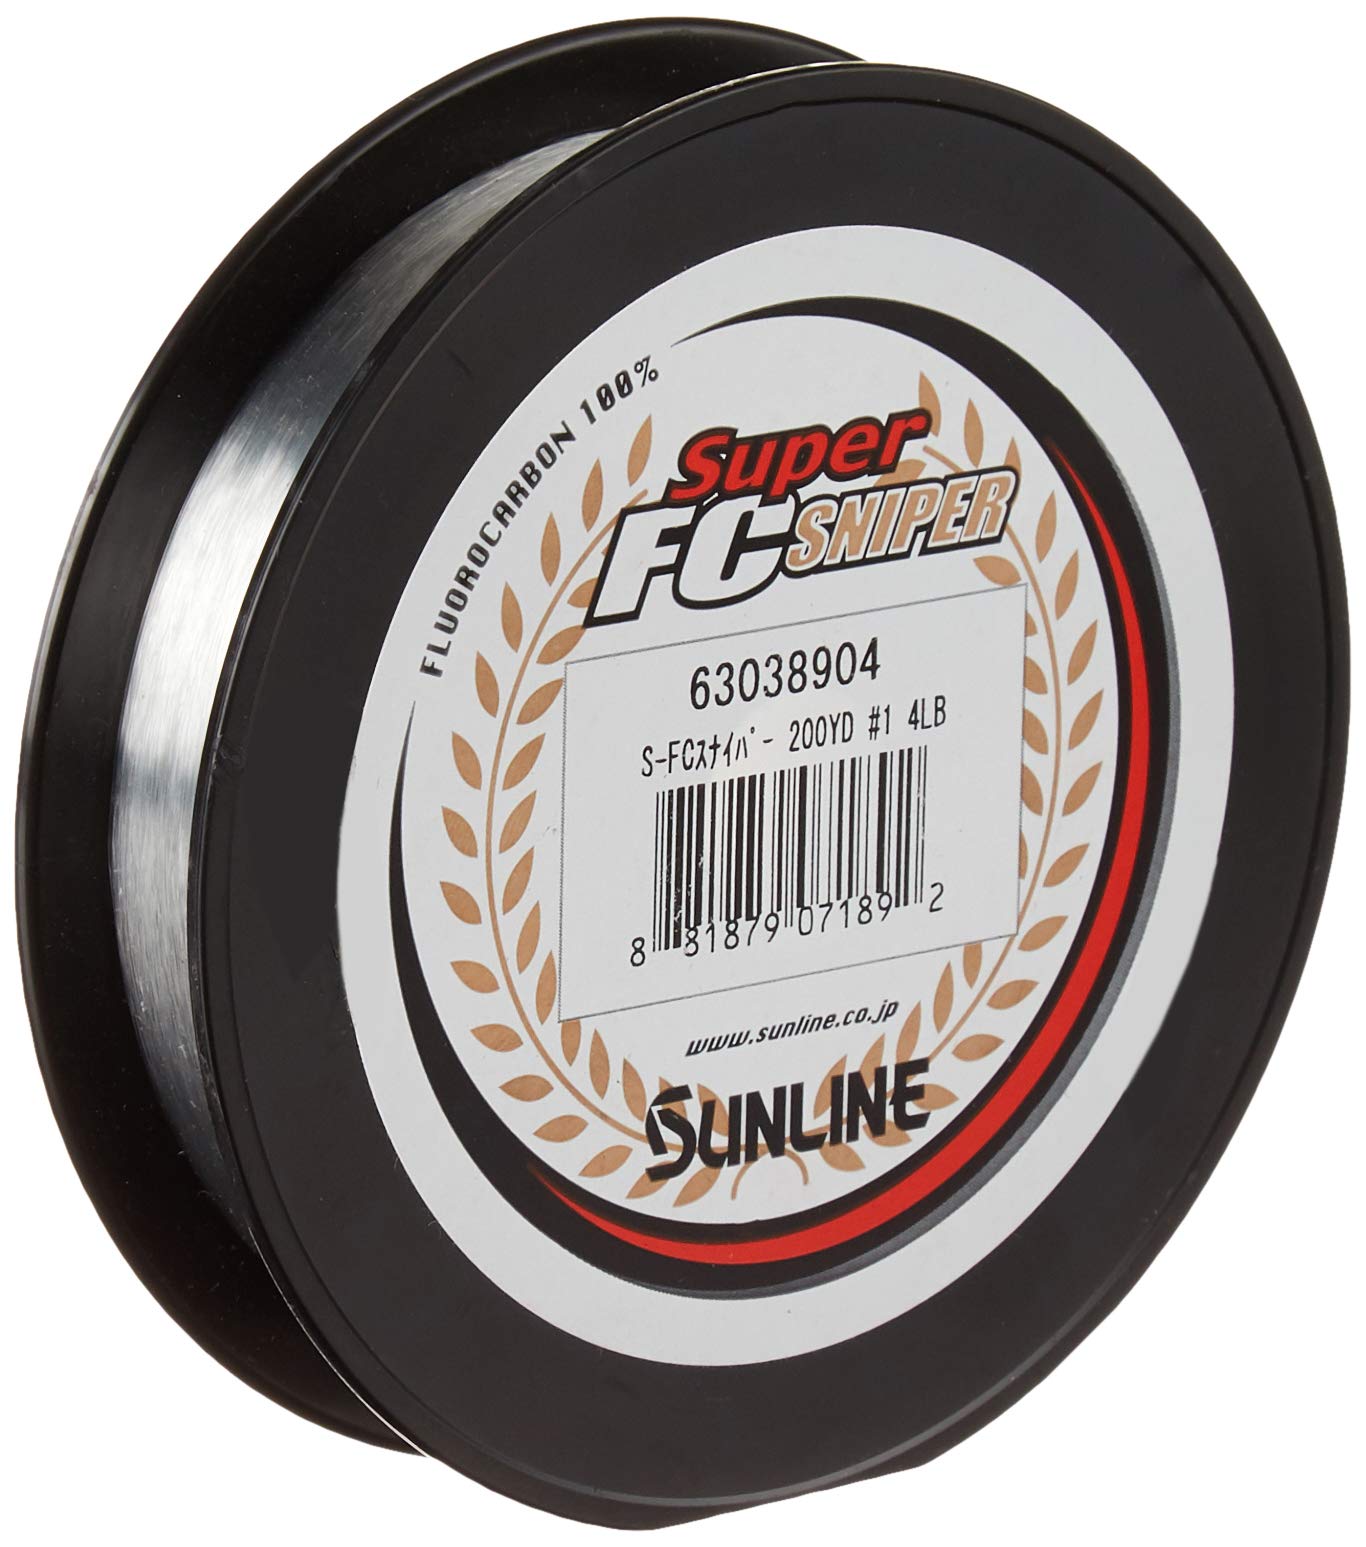 Sunline Super Fc Sniper Fluorocarbon Fishing Line (Natural Clear, 5-Pounds200-Yards)